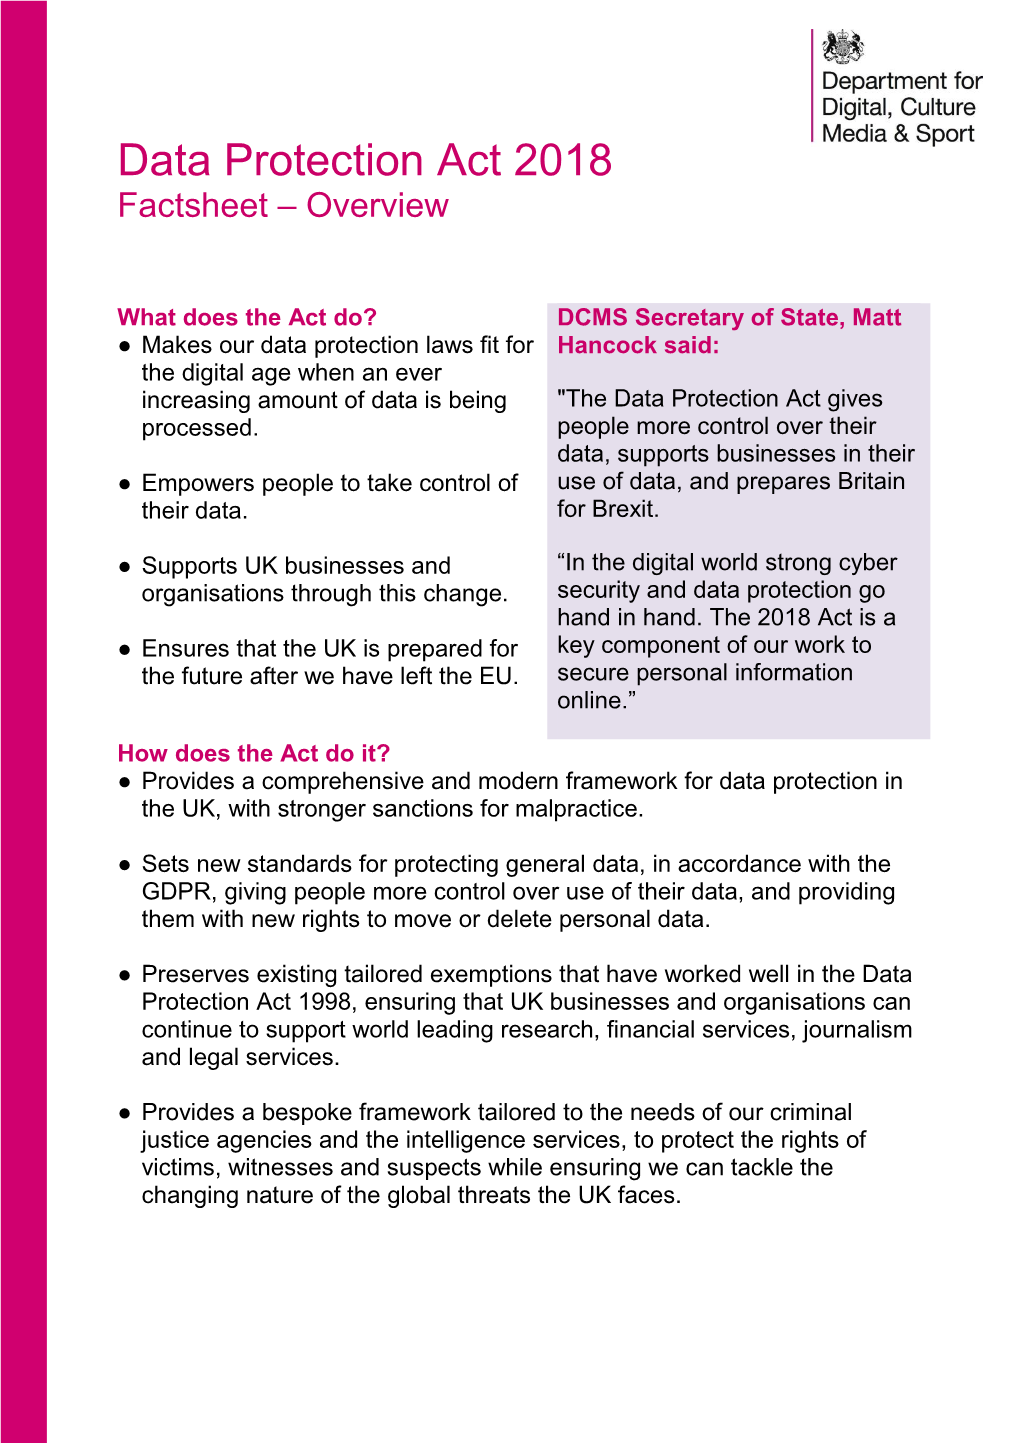 Data Protection Act 2018 Factsheet – Overview